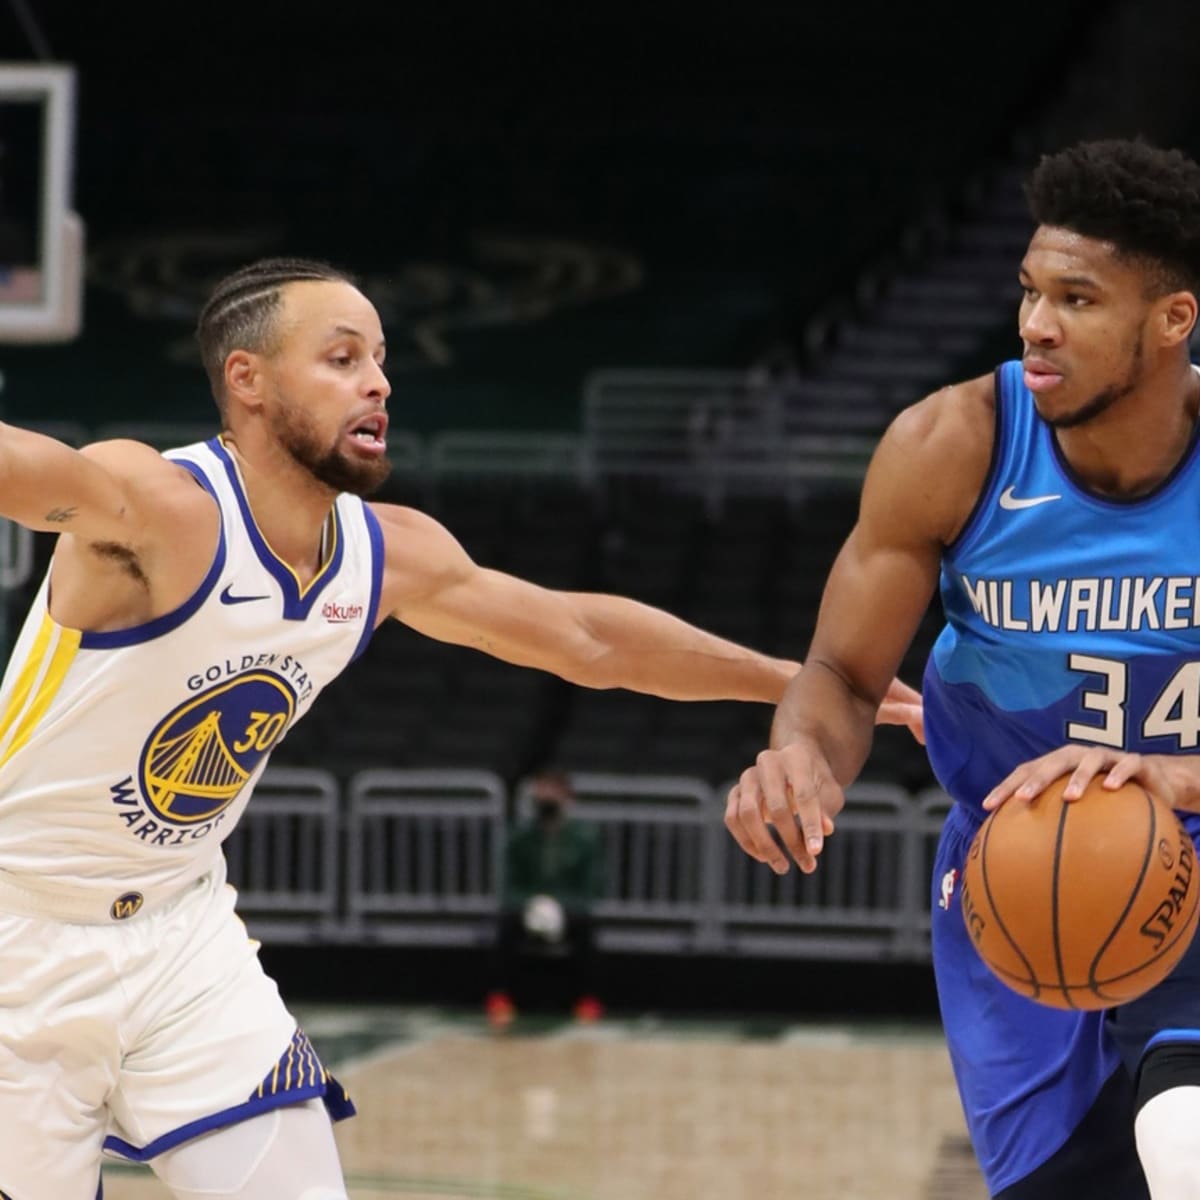 Steph Curry and Giannis Antetokounmpo square off for Warriors vs